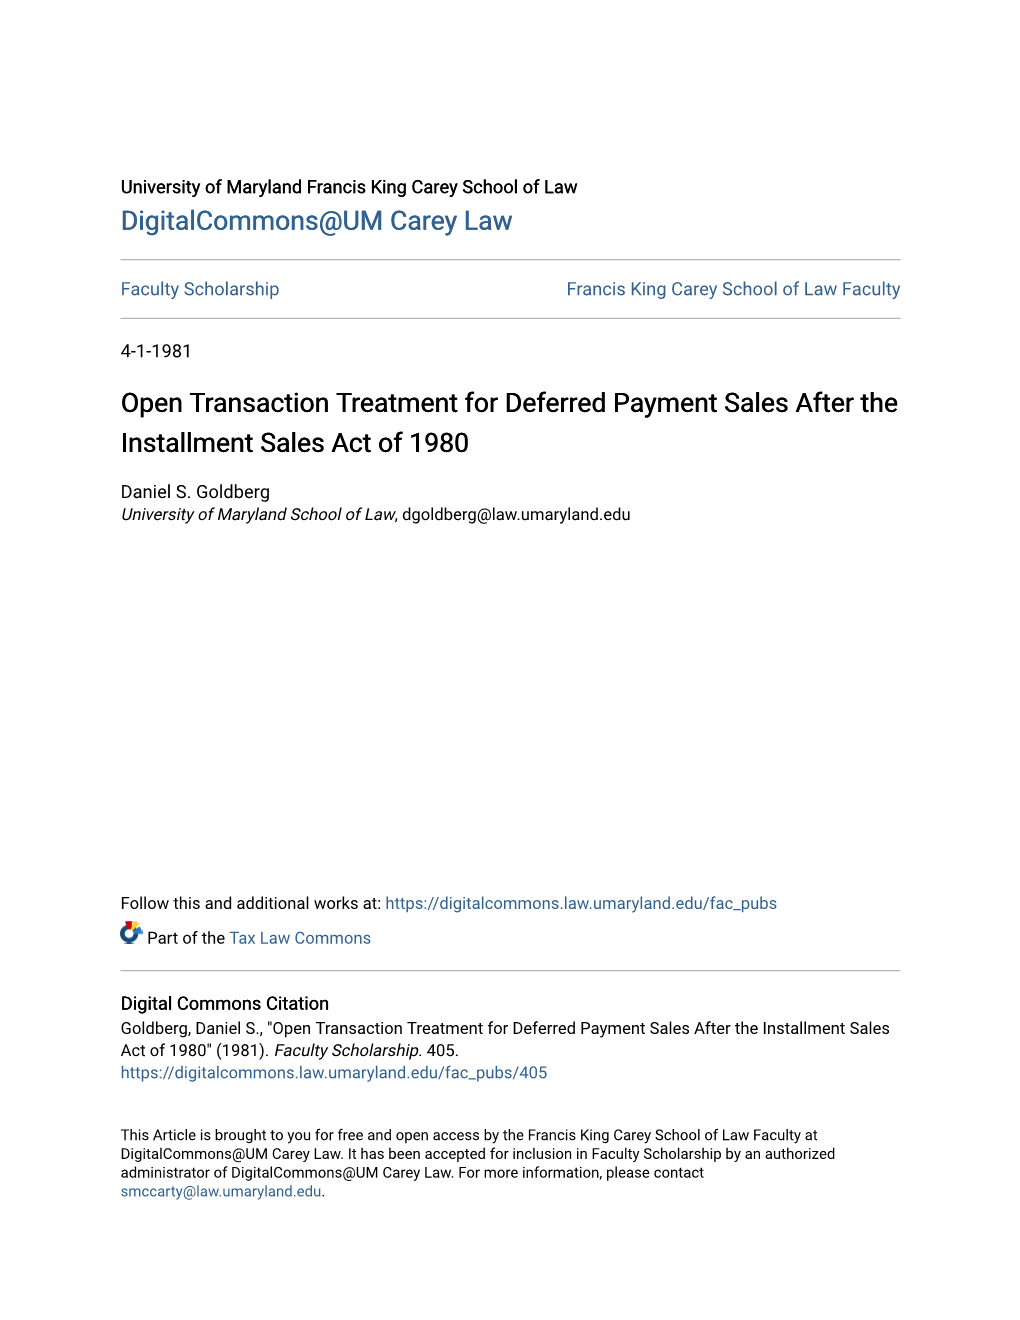 Open Transaction Treatment for Deferred Payment Sales After the Installment Sales Act of 1980